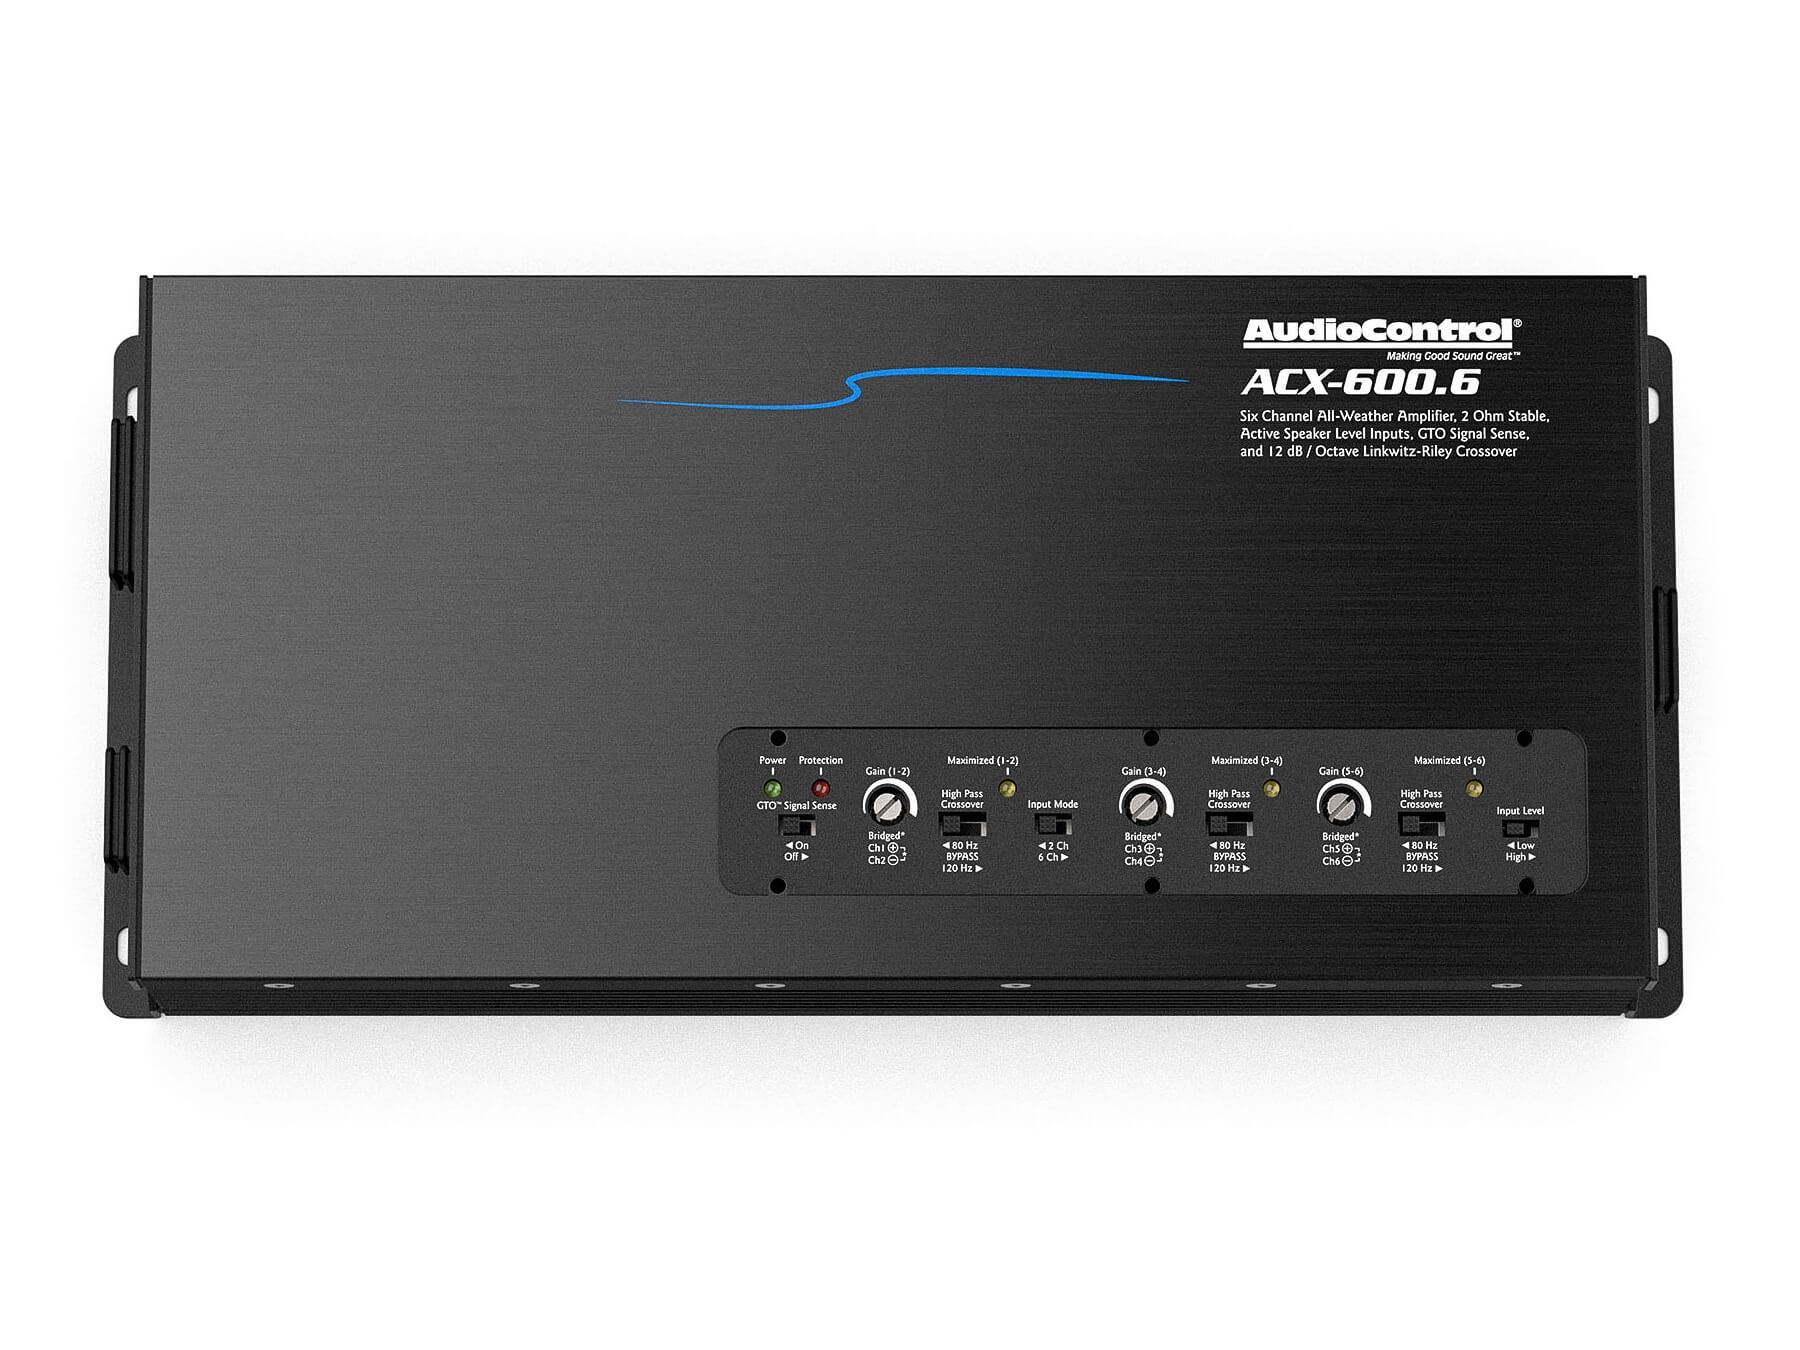 AudioControl ACX-600.6 - Top / Without Cover